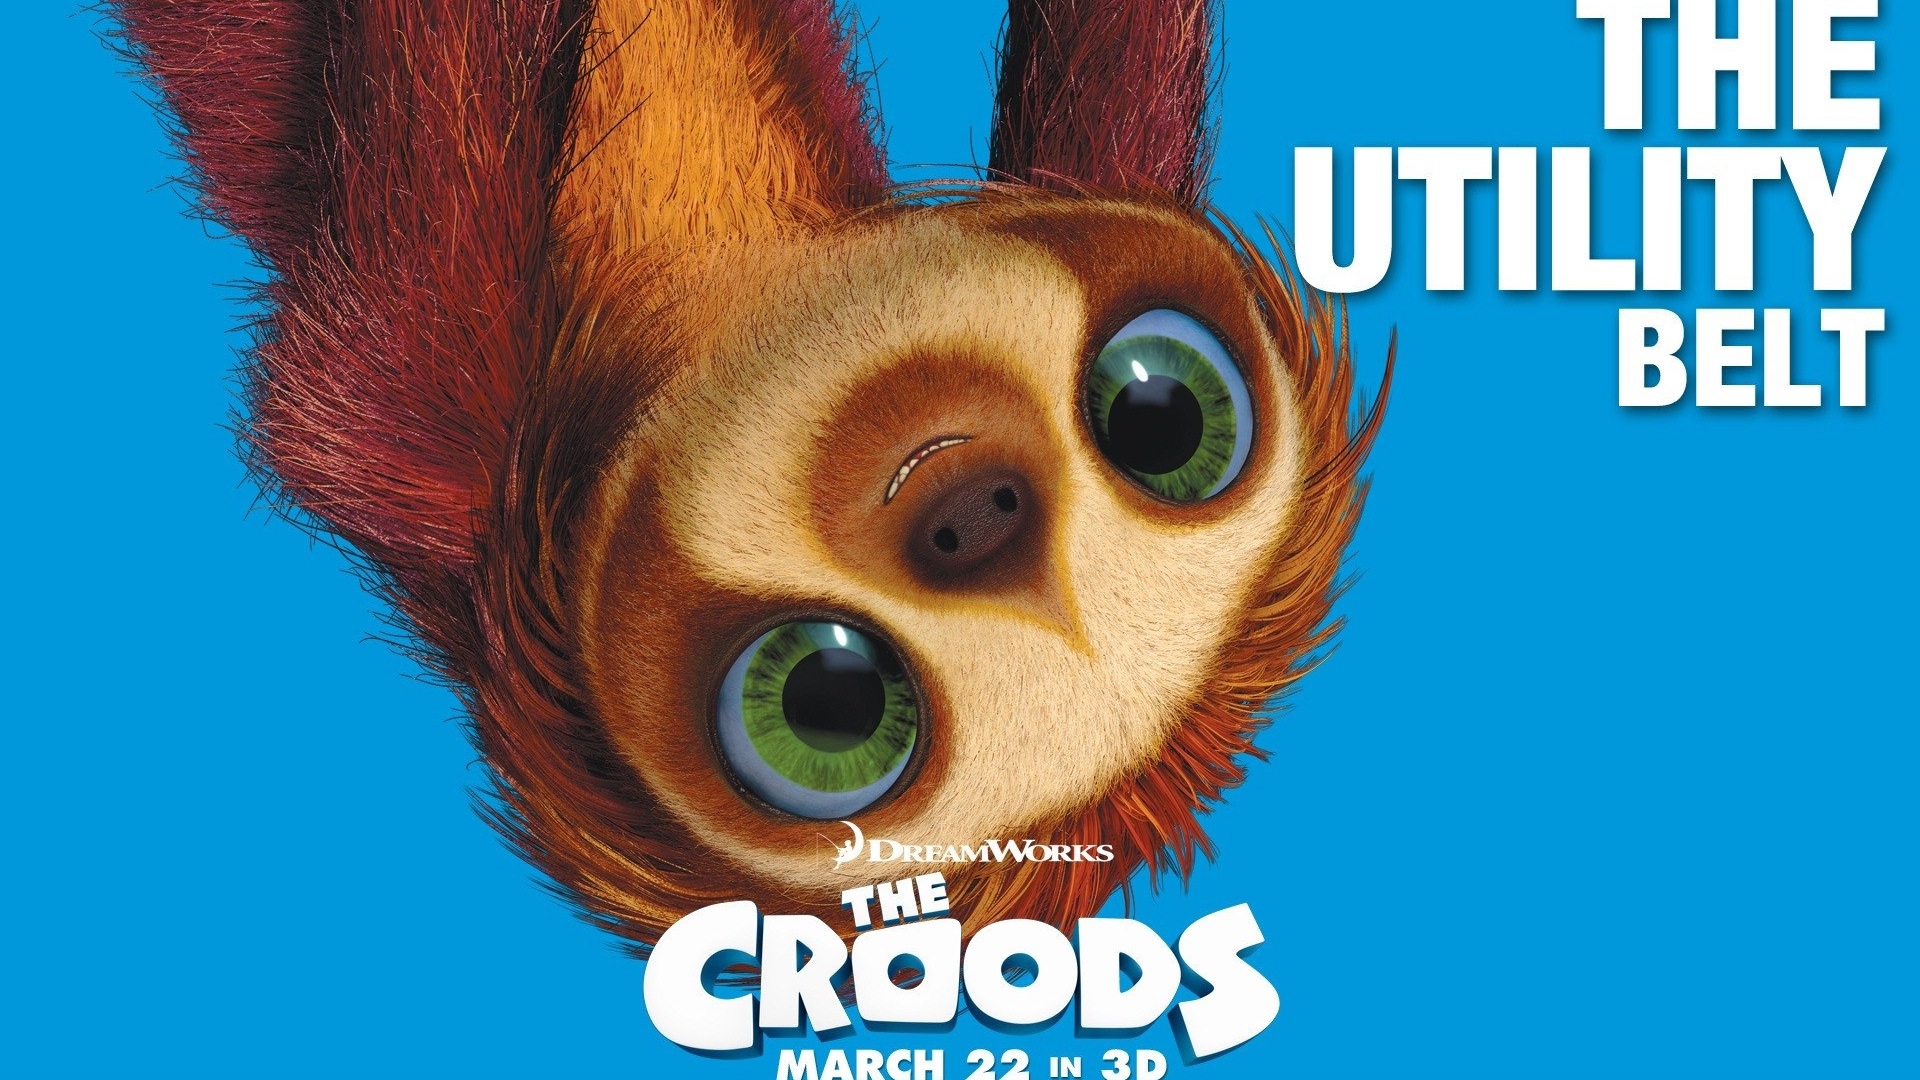 V Croods HD Movie Wallpapers #14 - 1920x1080